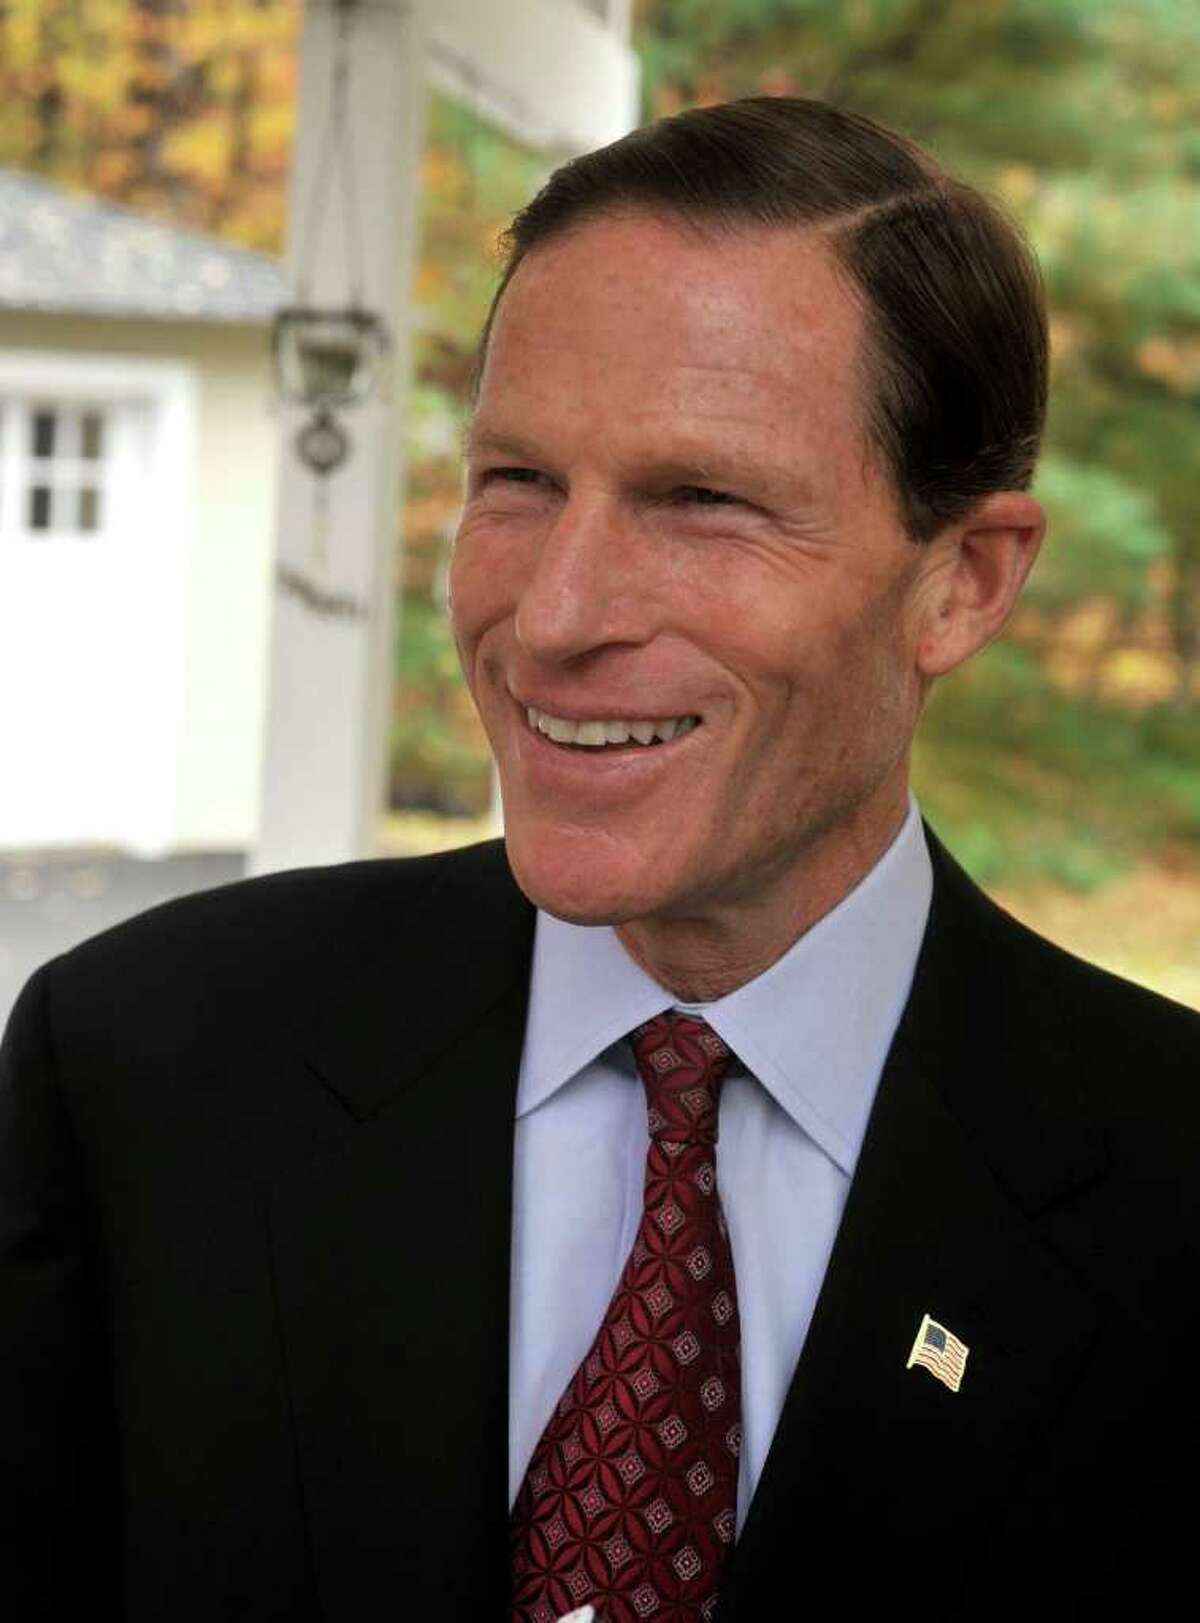 U.S. Sen. Richard Blumenthal, D-Conn., seen here in 2010 while he was still Connecticut's attorney general.